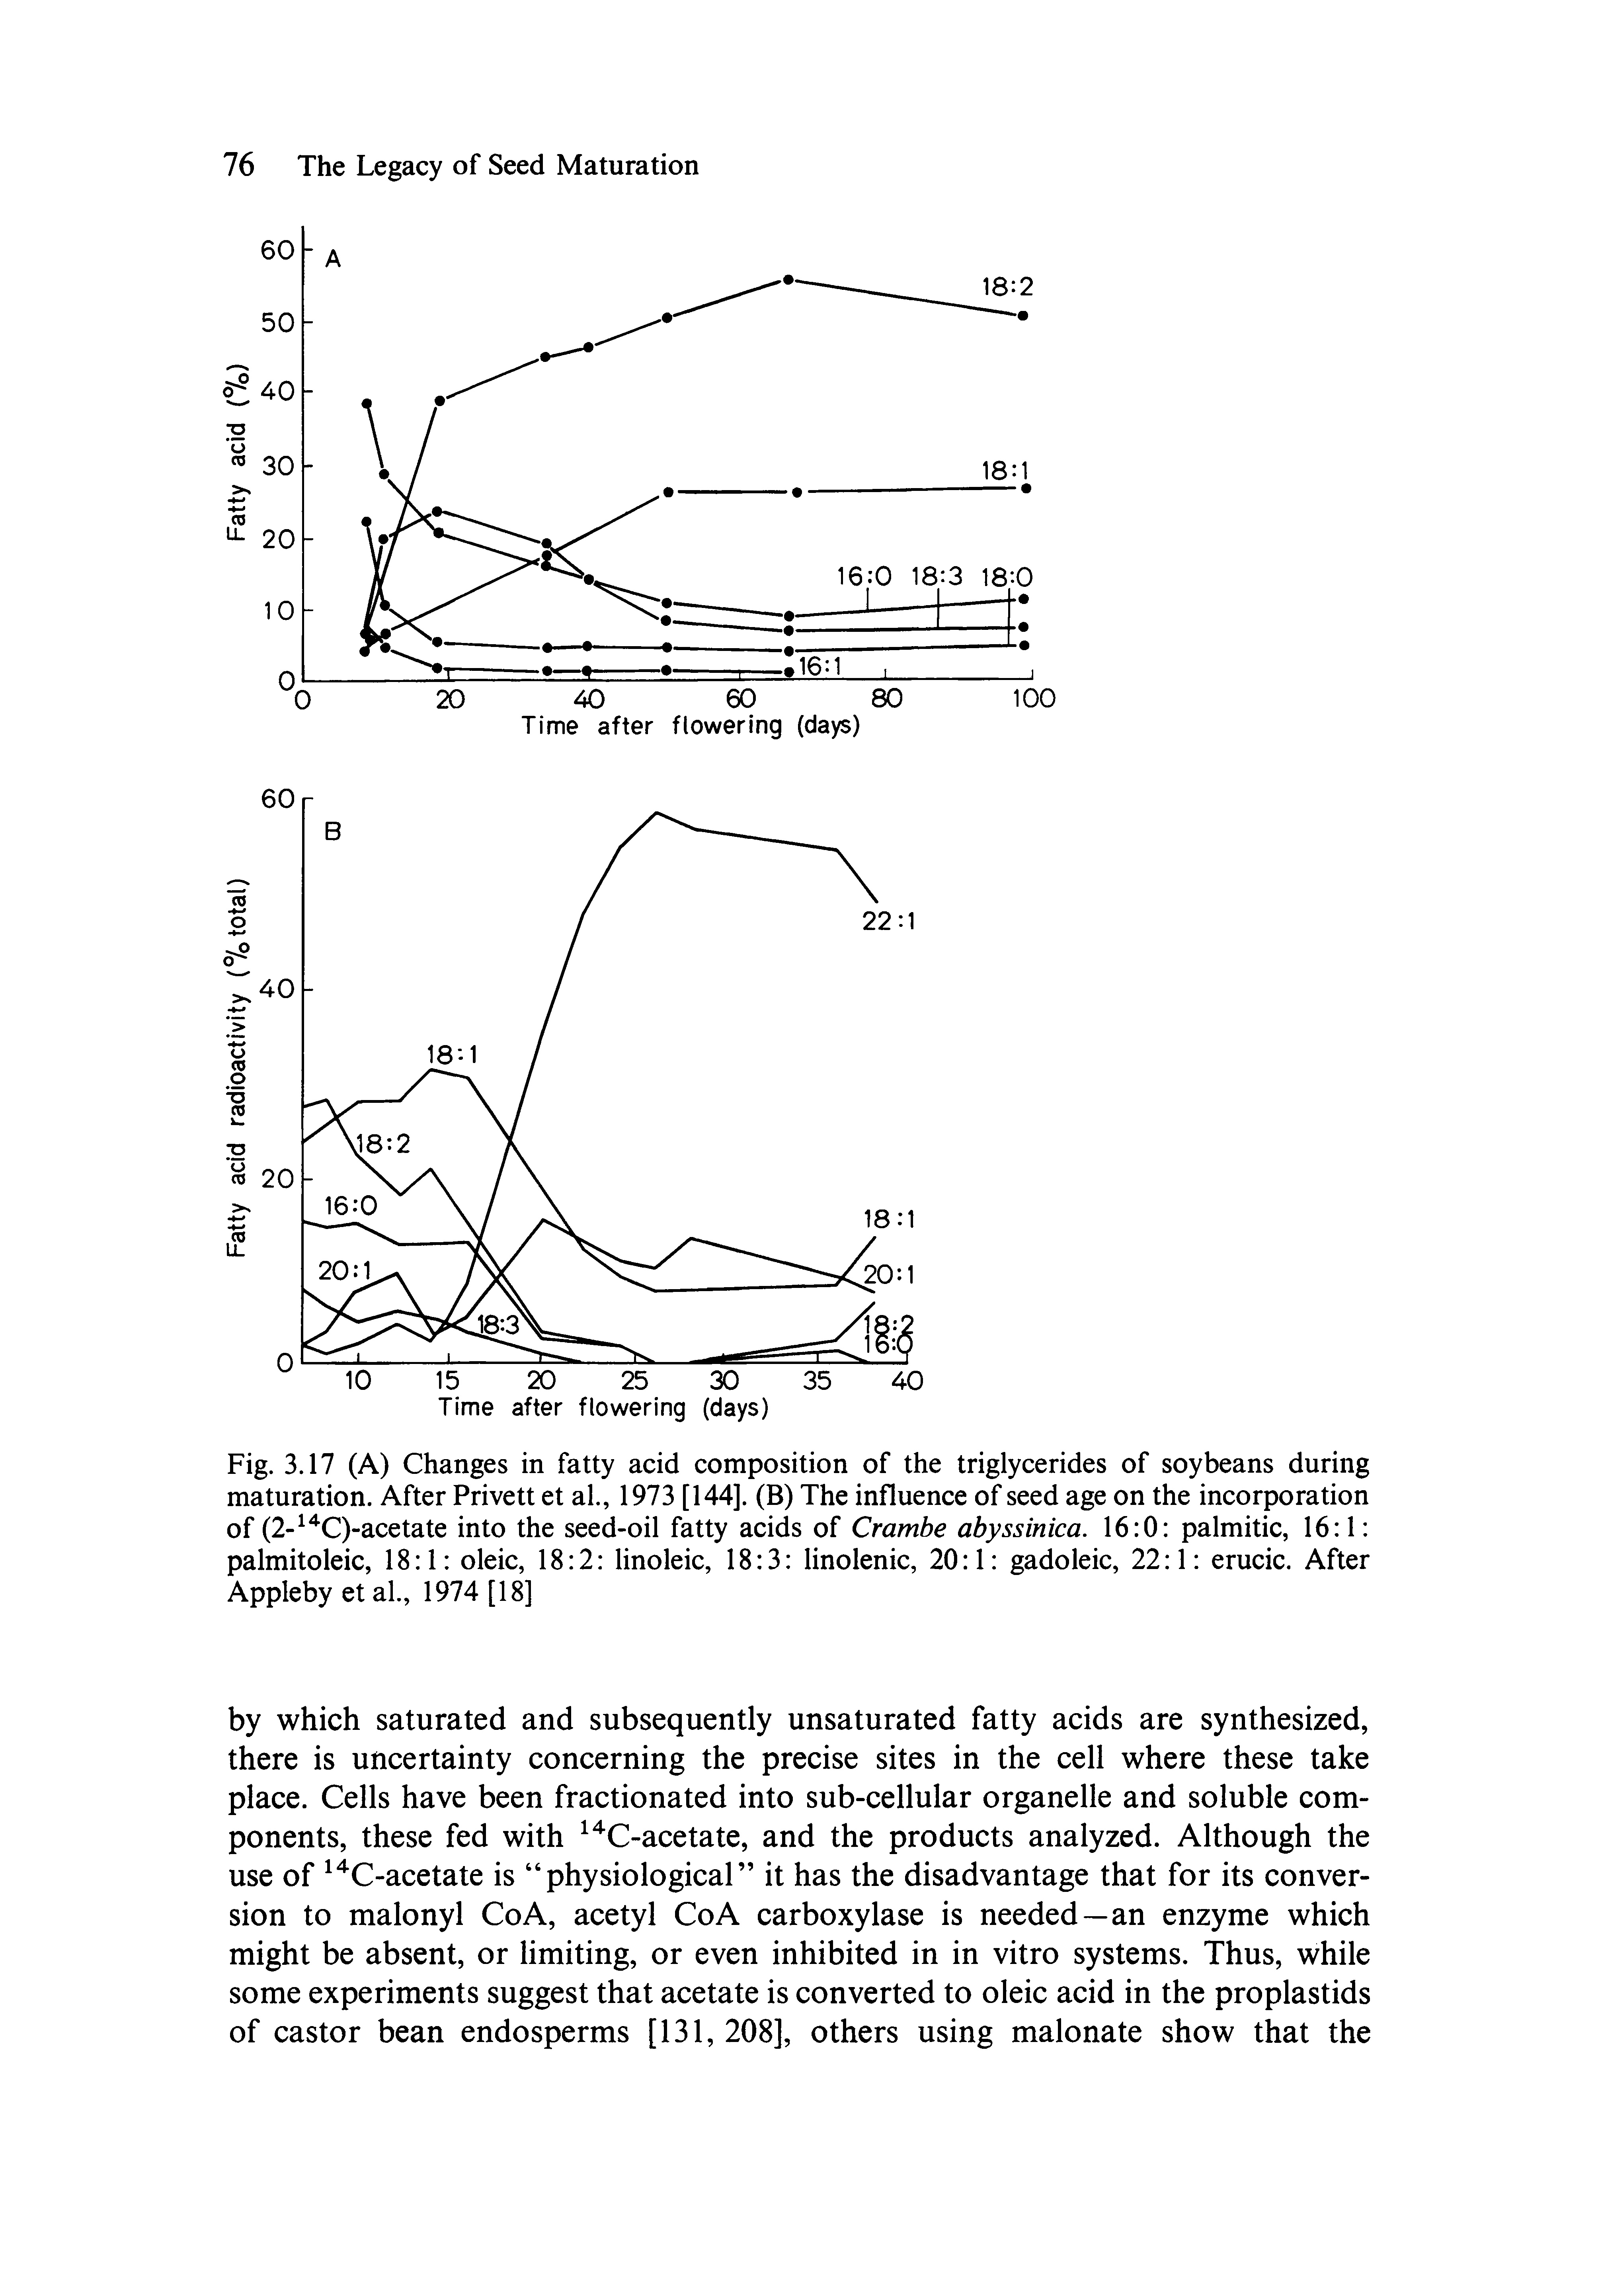 Fig. 3.17 (A) Changes in fatty acid composition of the triglycerides of soybeans during maturation. After Privett et al., 1973 [144]. (B) The influence of seed age on the incorporation of (2- C)-acetate into the seed-oil fatty acids of Crambe abyssinica. 16 0 palmitic, 16 1 palmitoleic, 18 1 oleic, 18 2 linoleic, 18 3 linolenic, 20 1 gadoleic, 22 1 erucic. After Appleby et al., 1974 [18]...